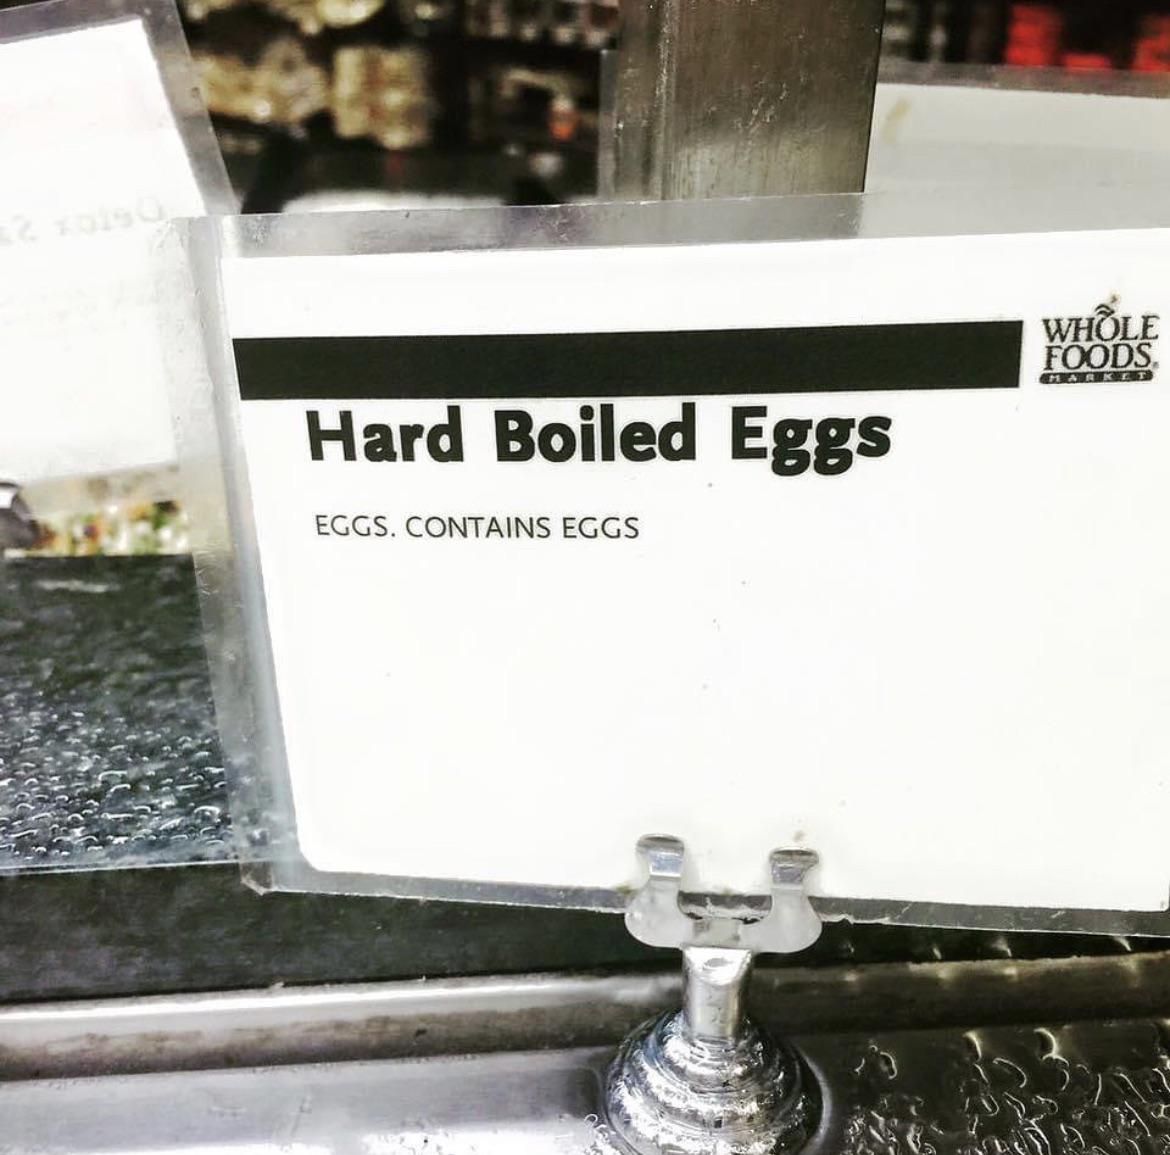 Whole Foods staff are tired of your bullsh*t